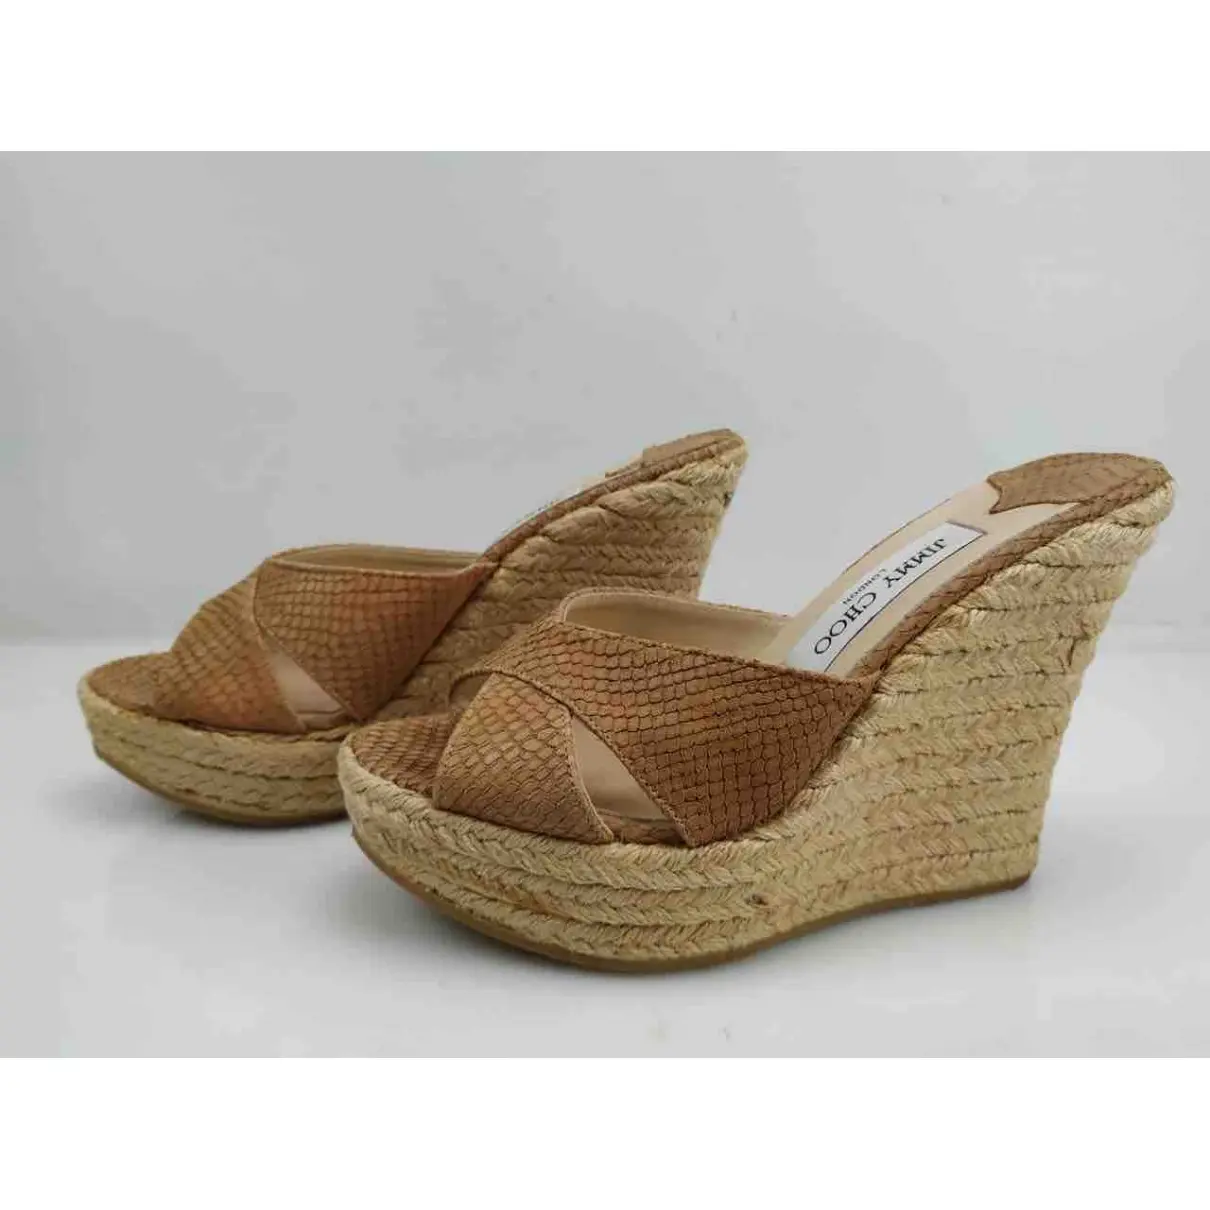 Jimmy Choo Leather espadrilles for sale